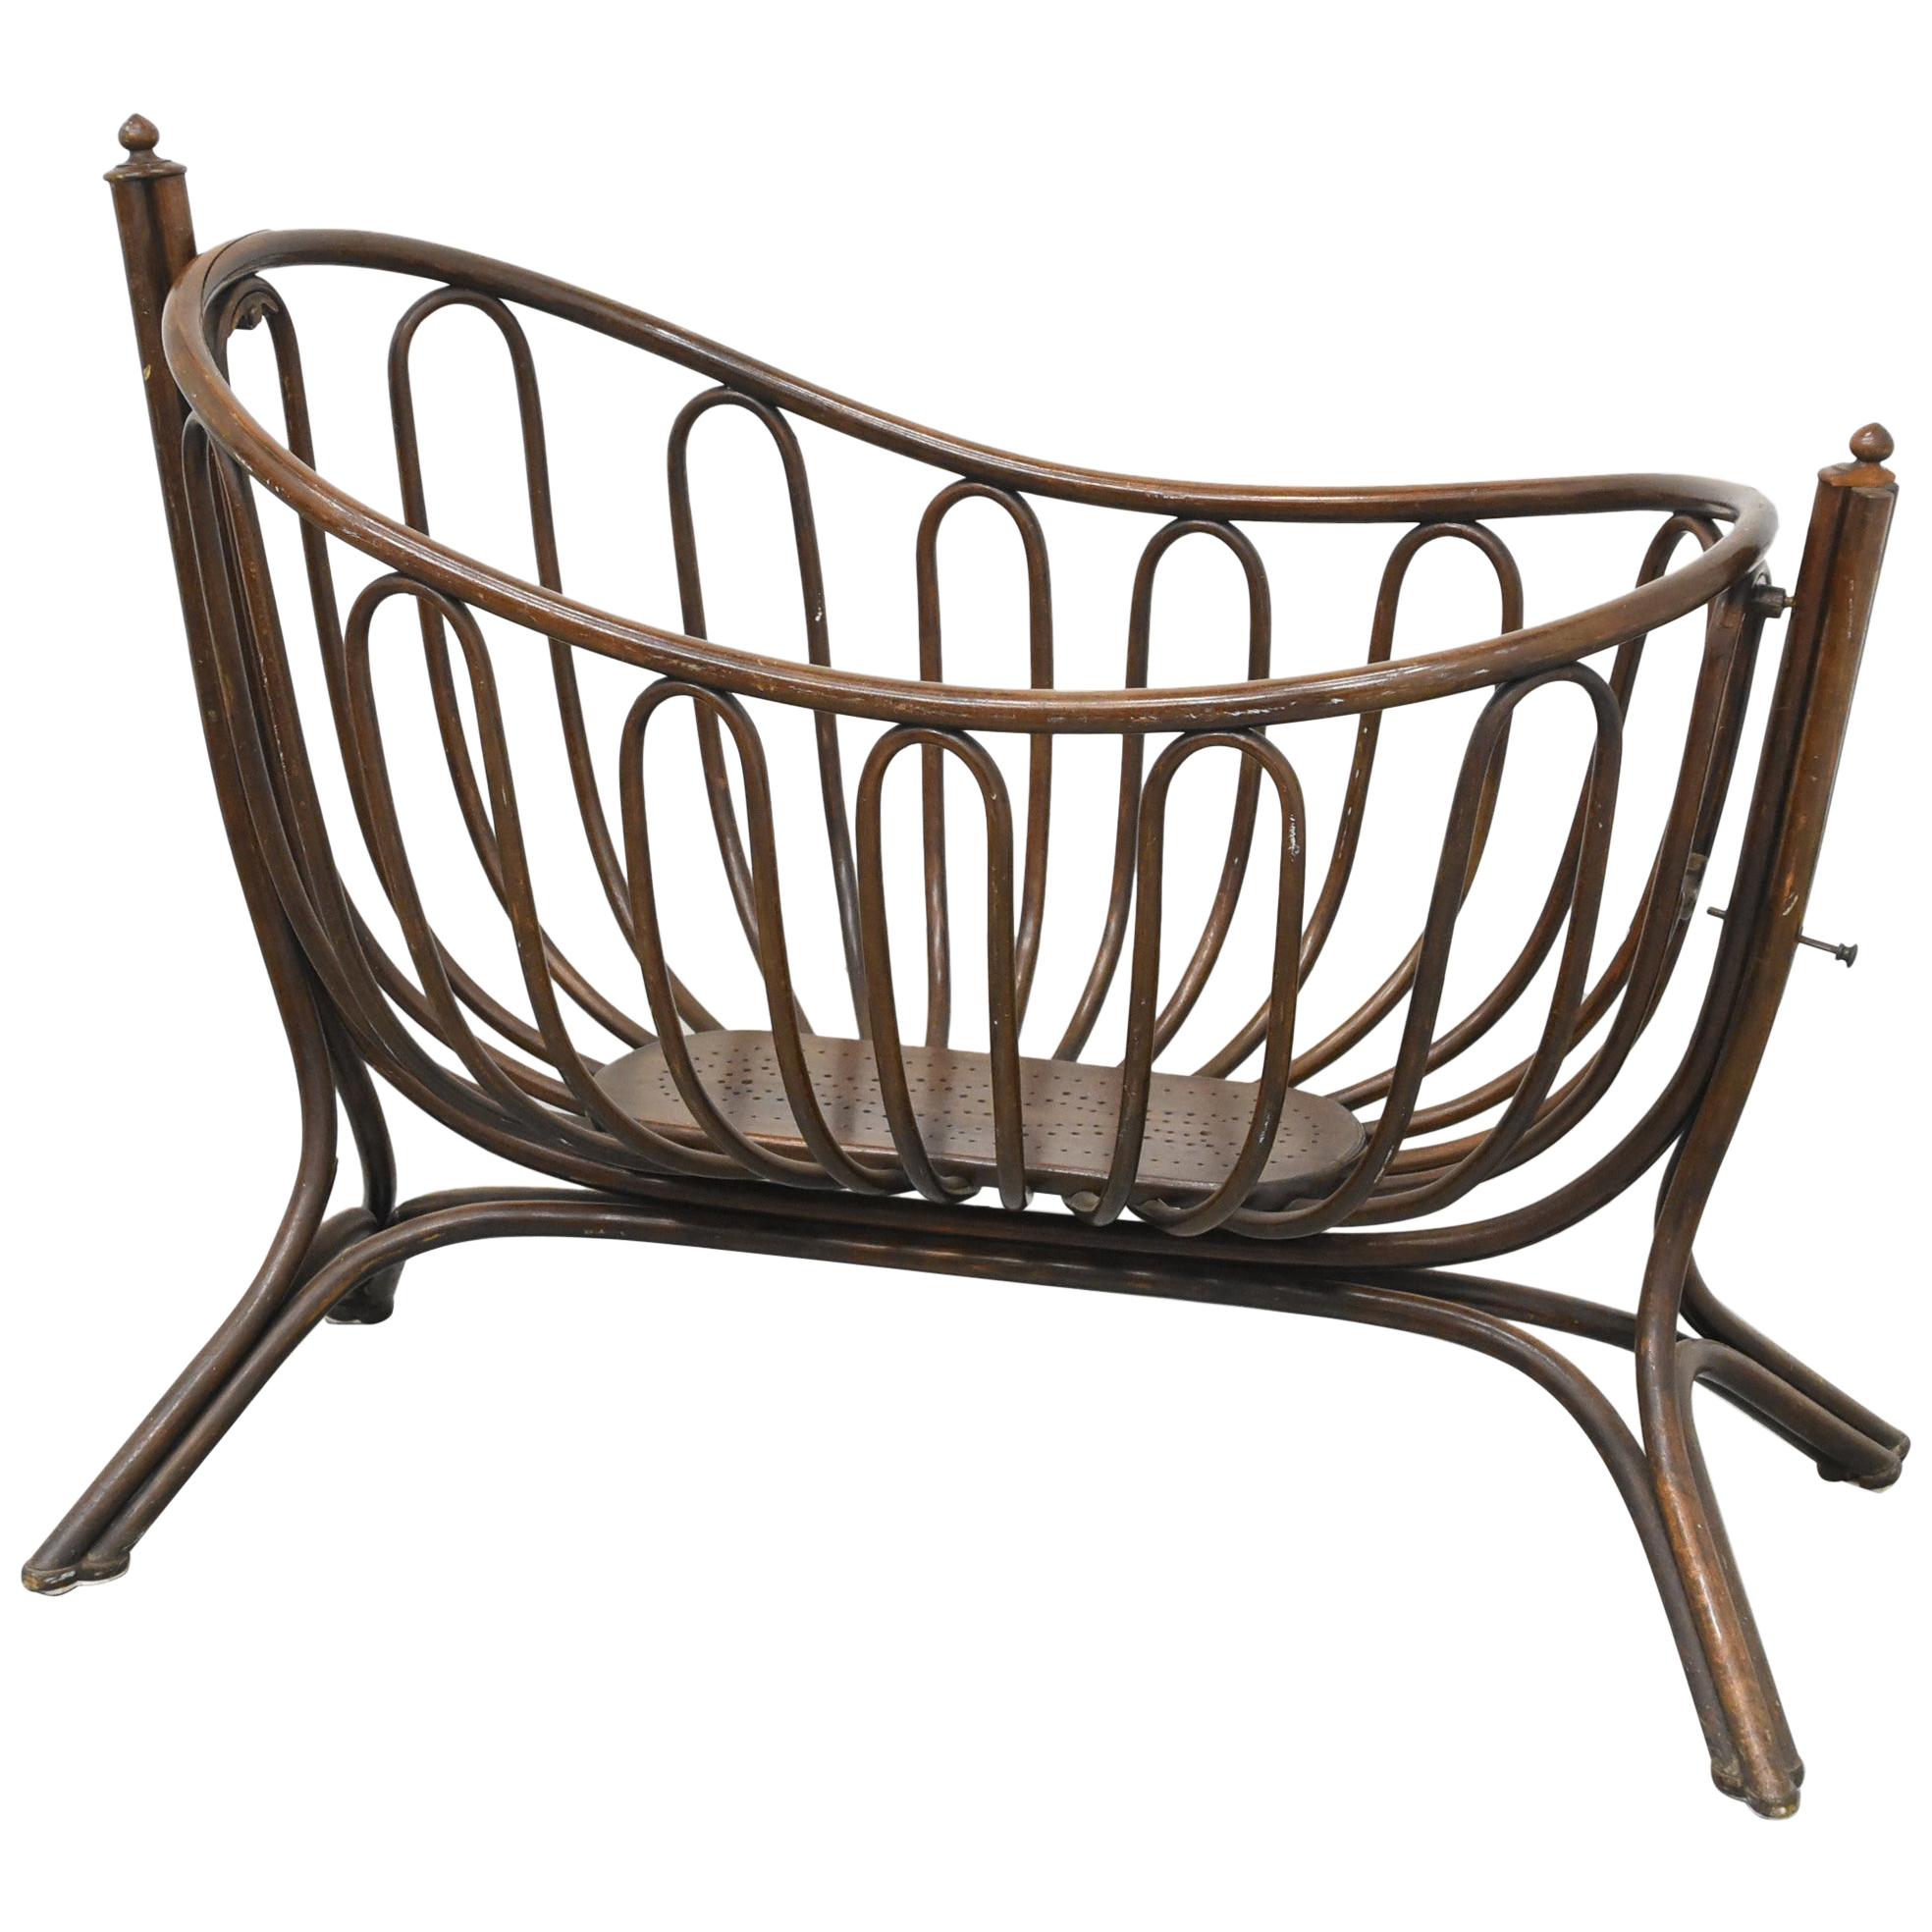 Cradle for Baby Art Nouveau Bentwood Attributed to Thonet, circa 1900, Label For Sale